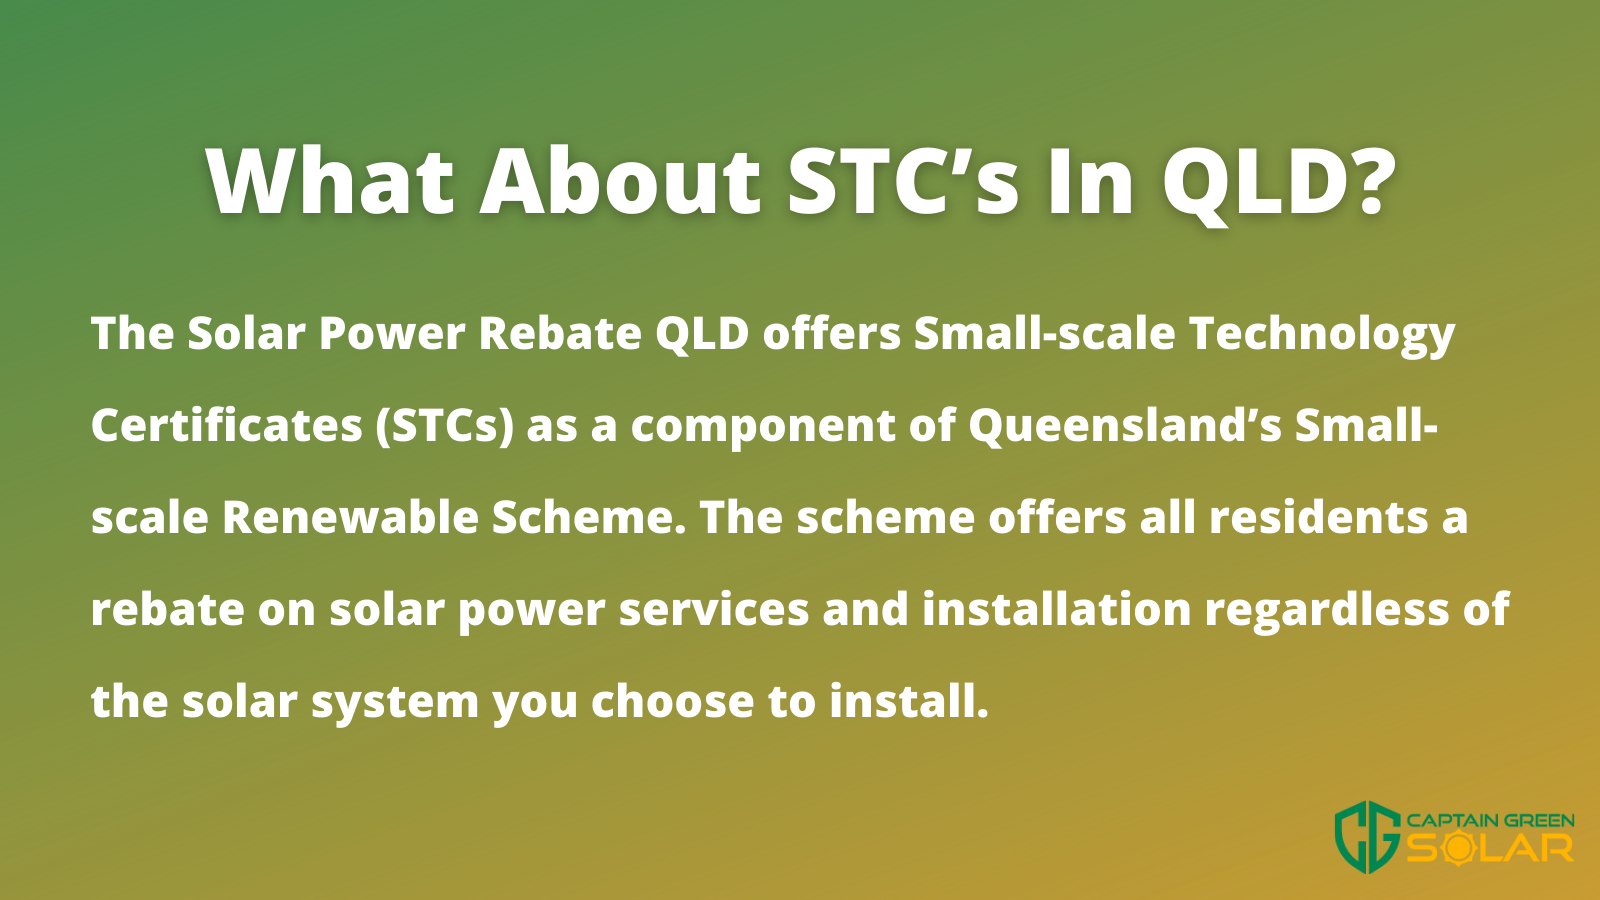 Solar Rebate Qld 2021 Your Guide Captain Green Solar